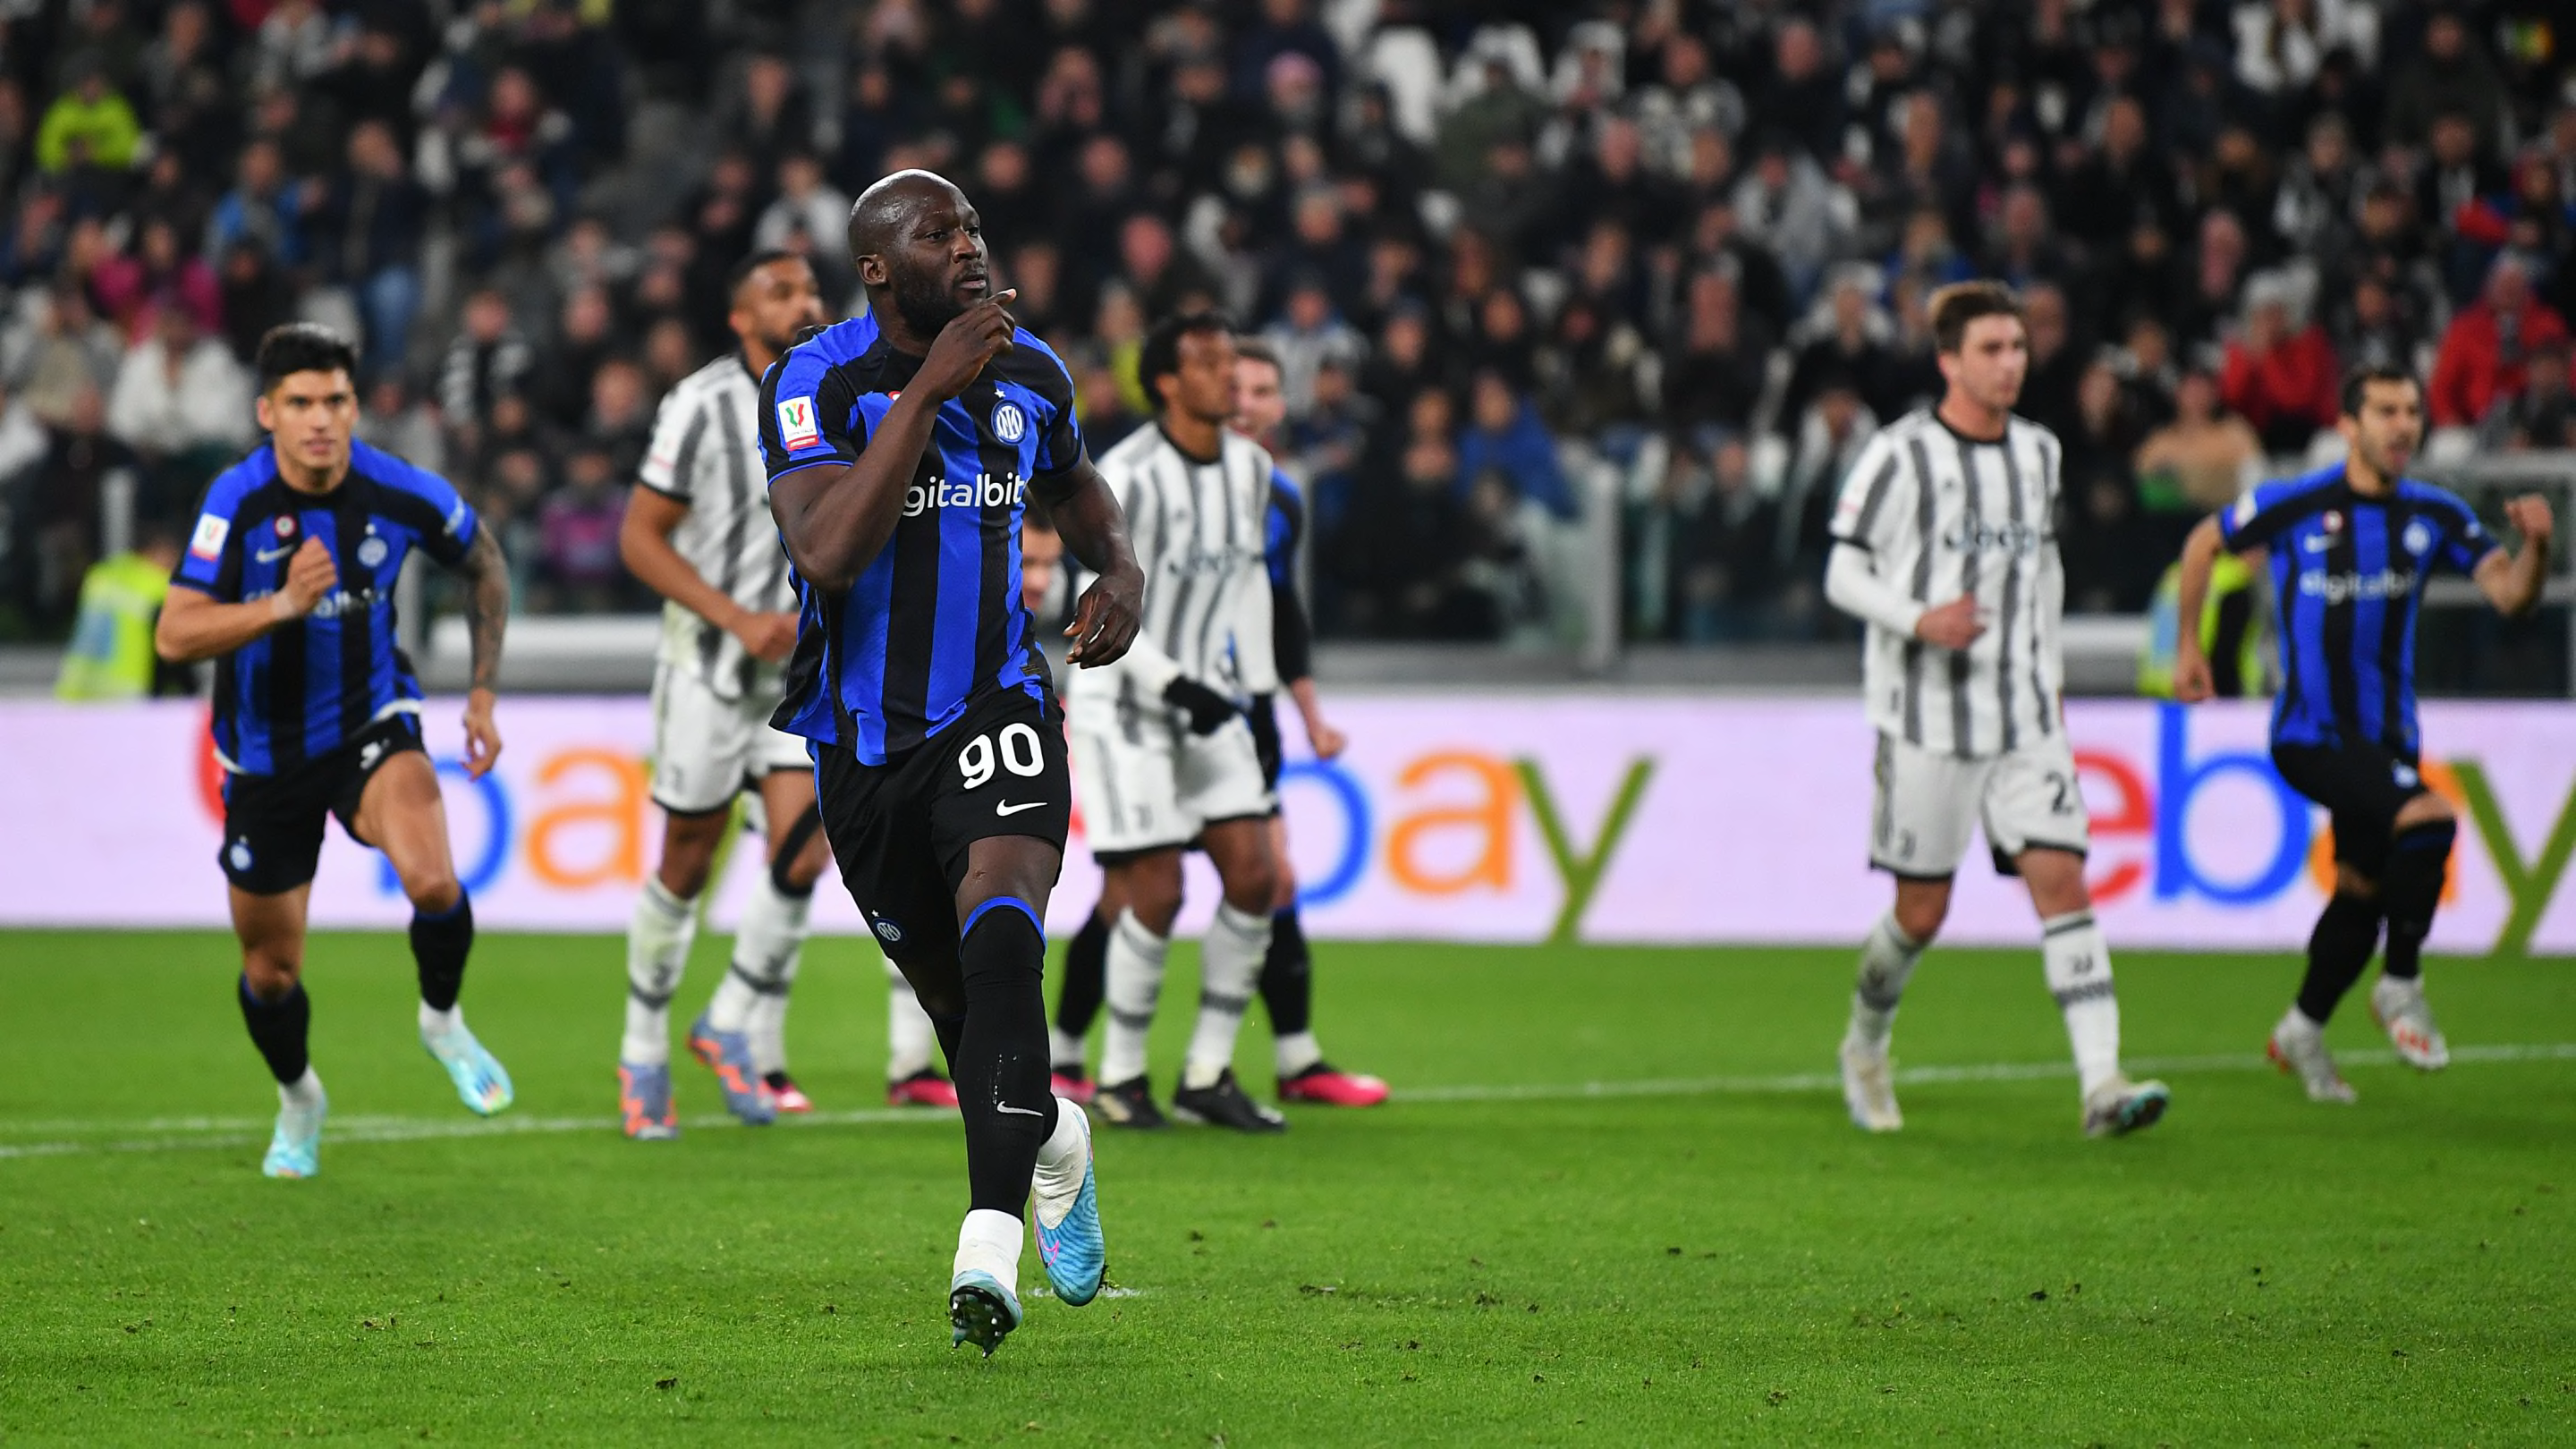 Juventus 1-1 Inter: Player ratings from chaotic first leg of Coppa Italia semi-final thumbnail